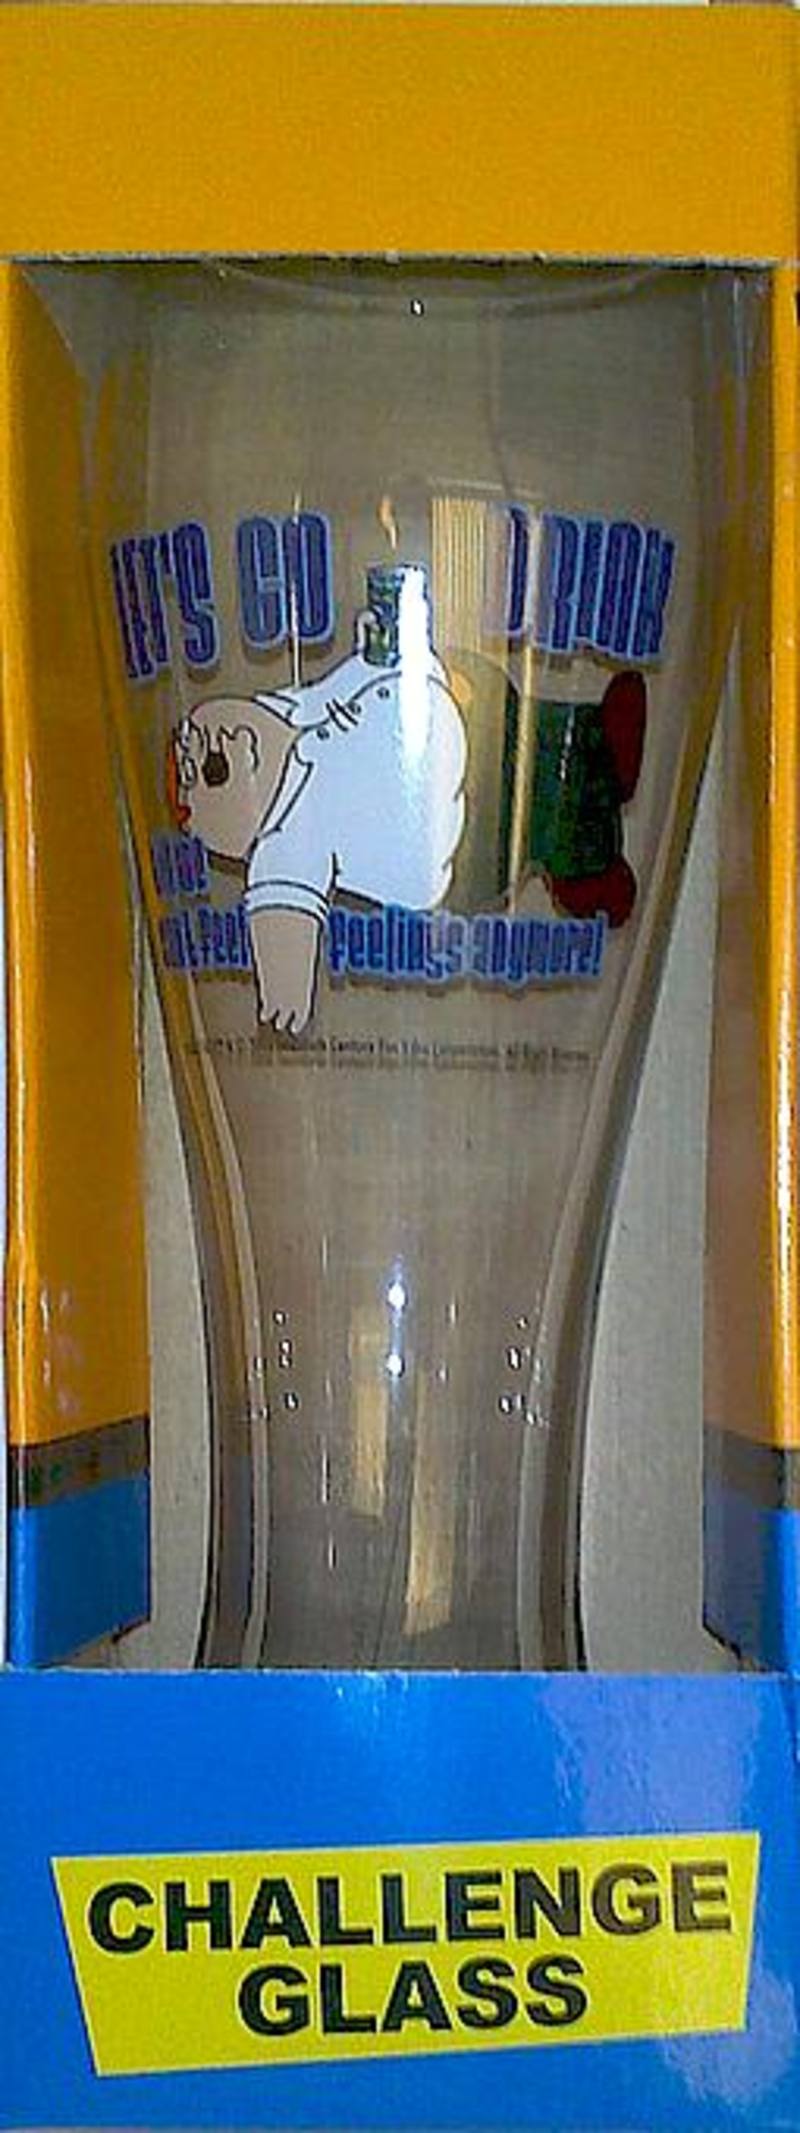 Family Guy Challenge Glass - Let's Go Drink